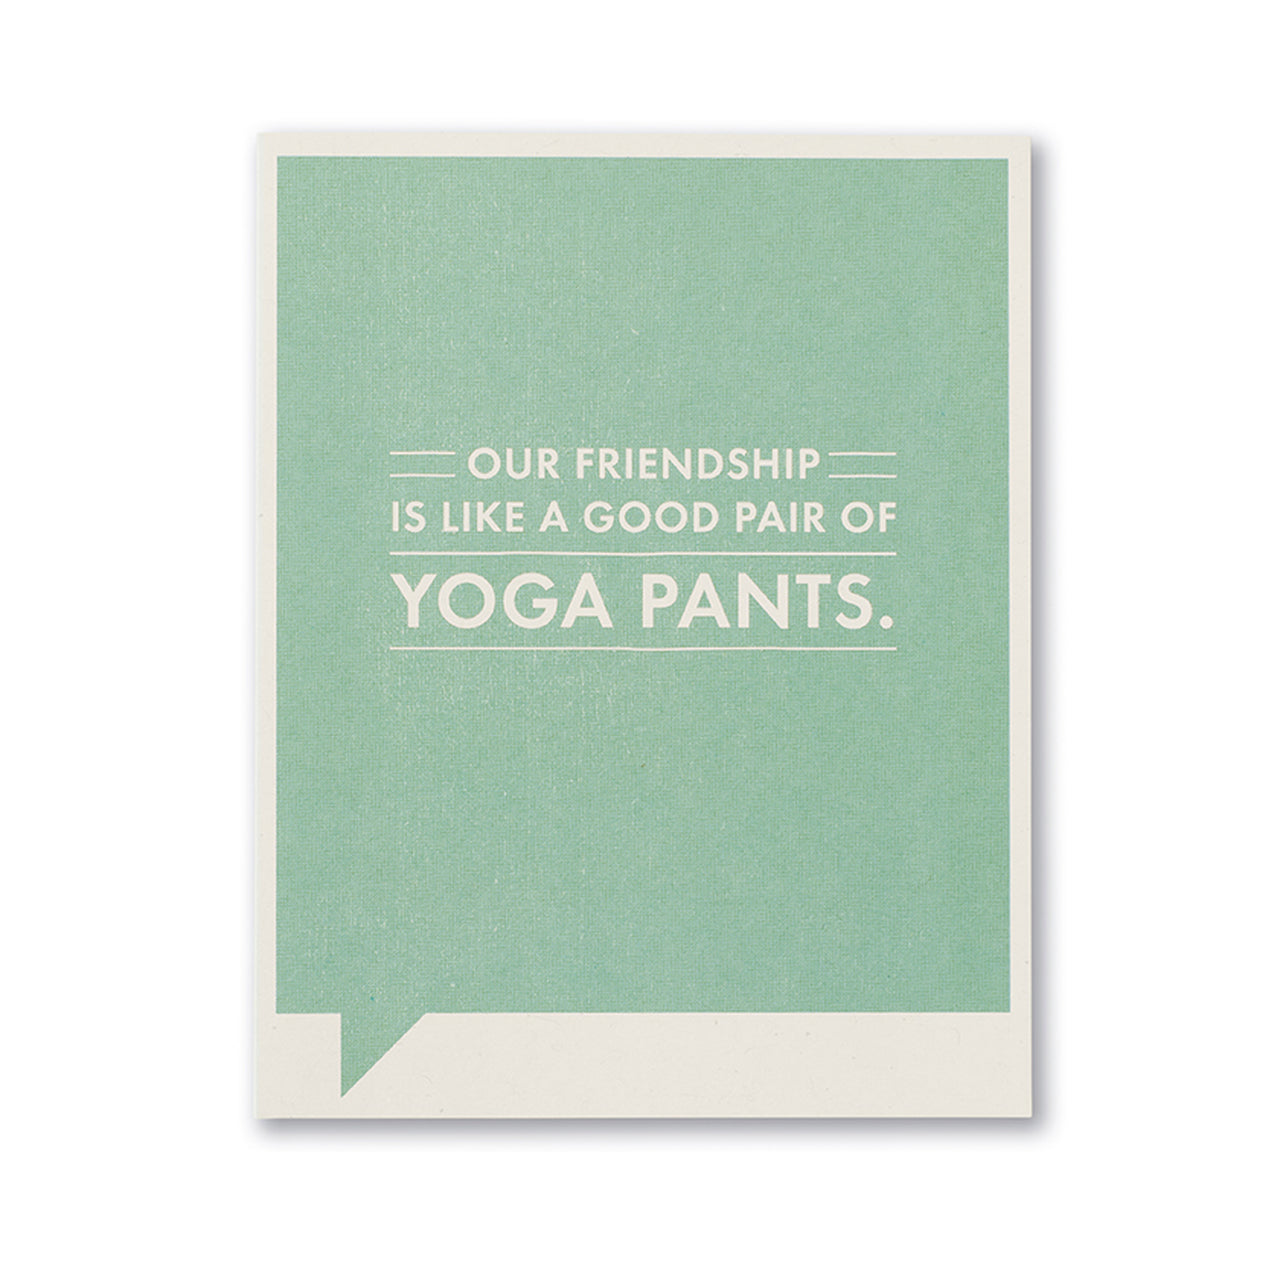 Our Friendship is like a good pair of yoga pants - Card